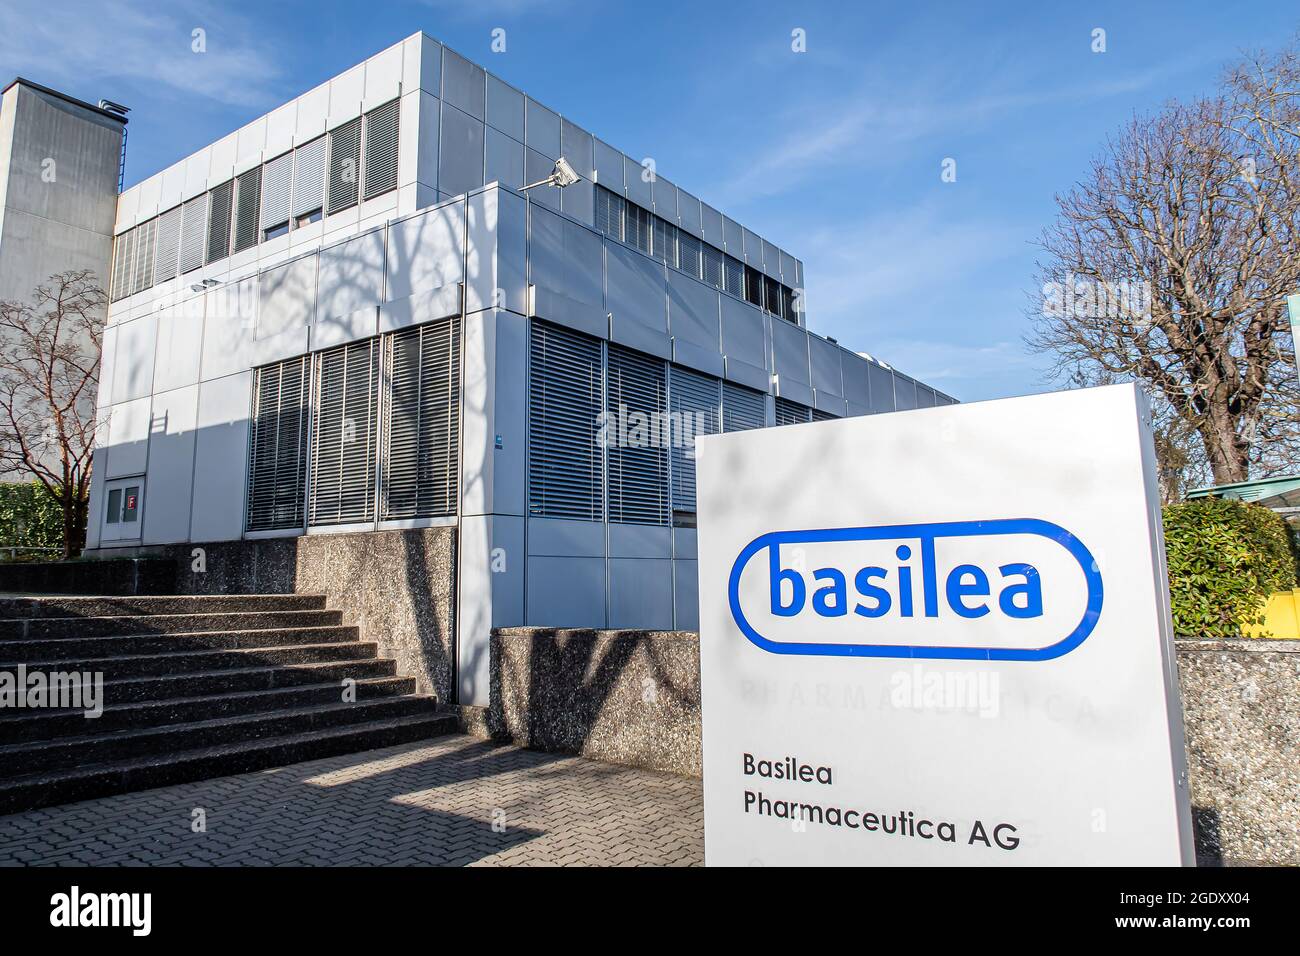 BASEL, SWITZERLAND - MARCH 15, 2020: Basilea Pharmaceutica is a multinational specialty biopharmaceutical company headquartered in Basel, Switzerland Stock Photo